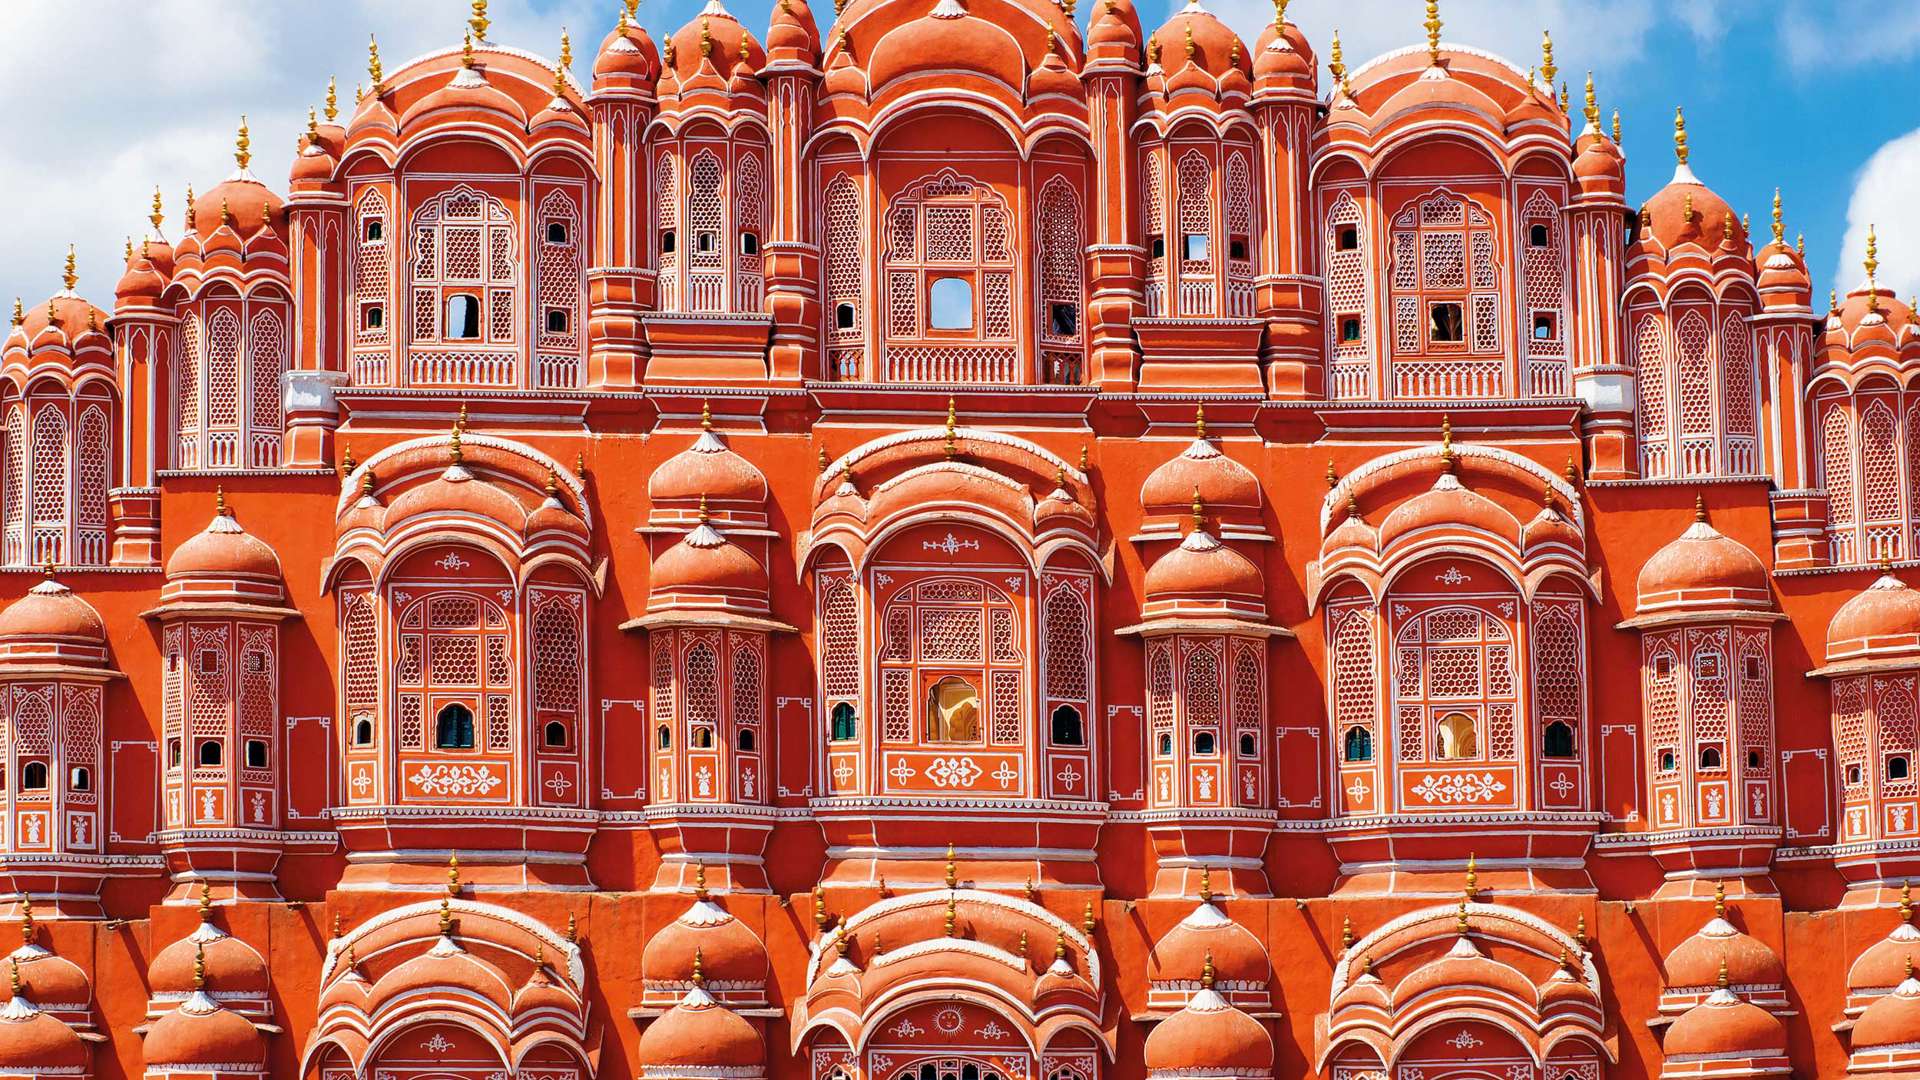 Palace Of The Winds, Jaipur, India